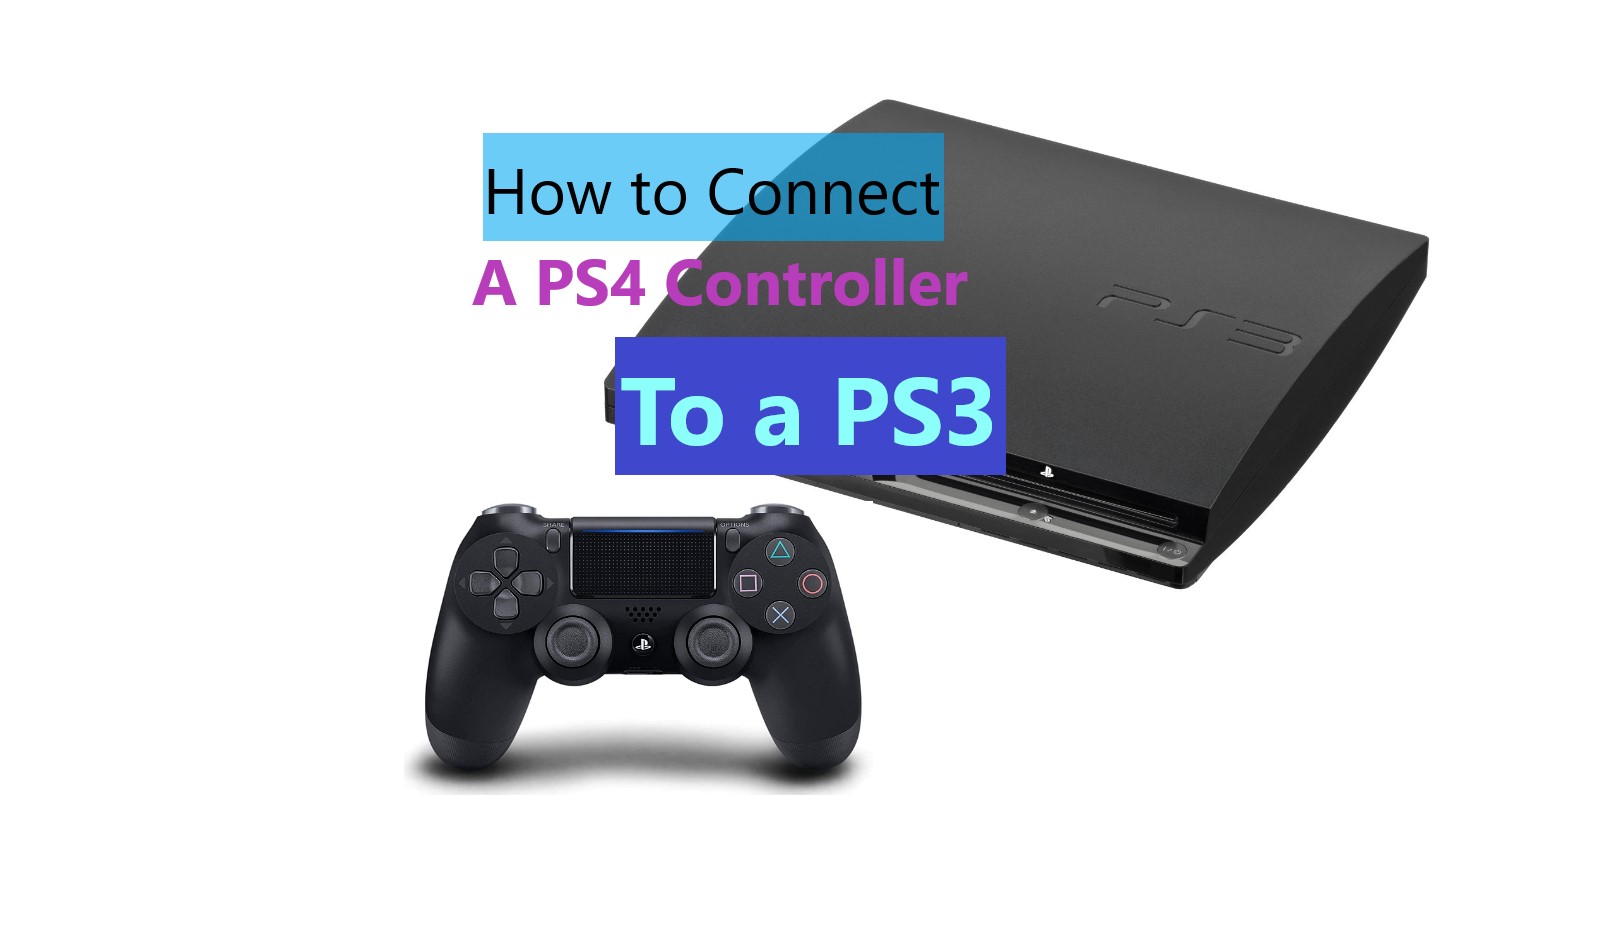 ps4 controller to ps3 console